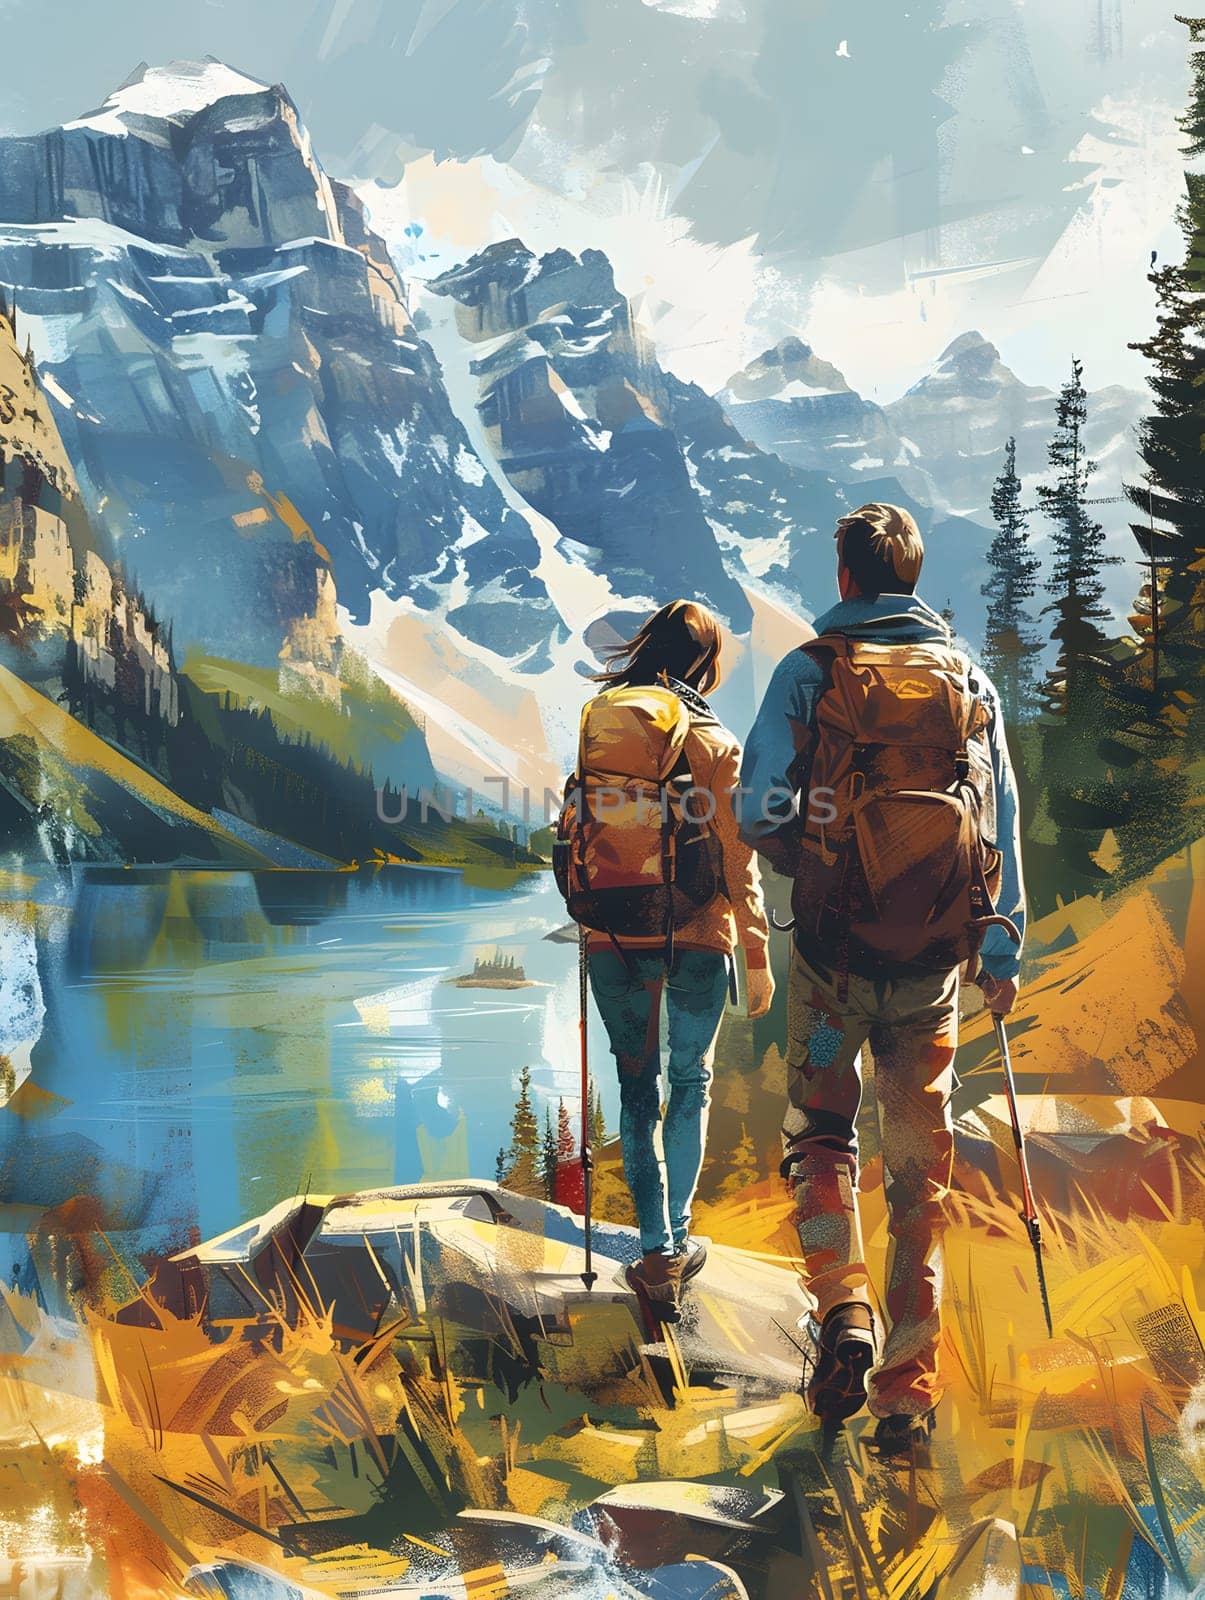 A couple is trekking through the mountainous landscape near a lake, surrounded by snowy peaks and beautiful plants. The sky is filled with clouds and the view of the mountain range is breathtaking